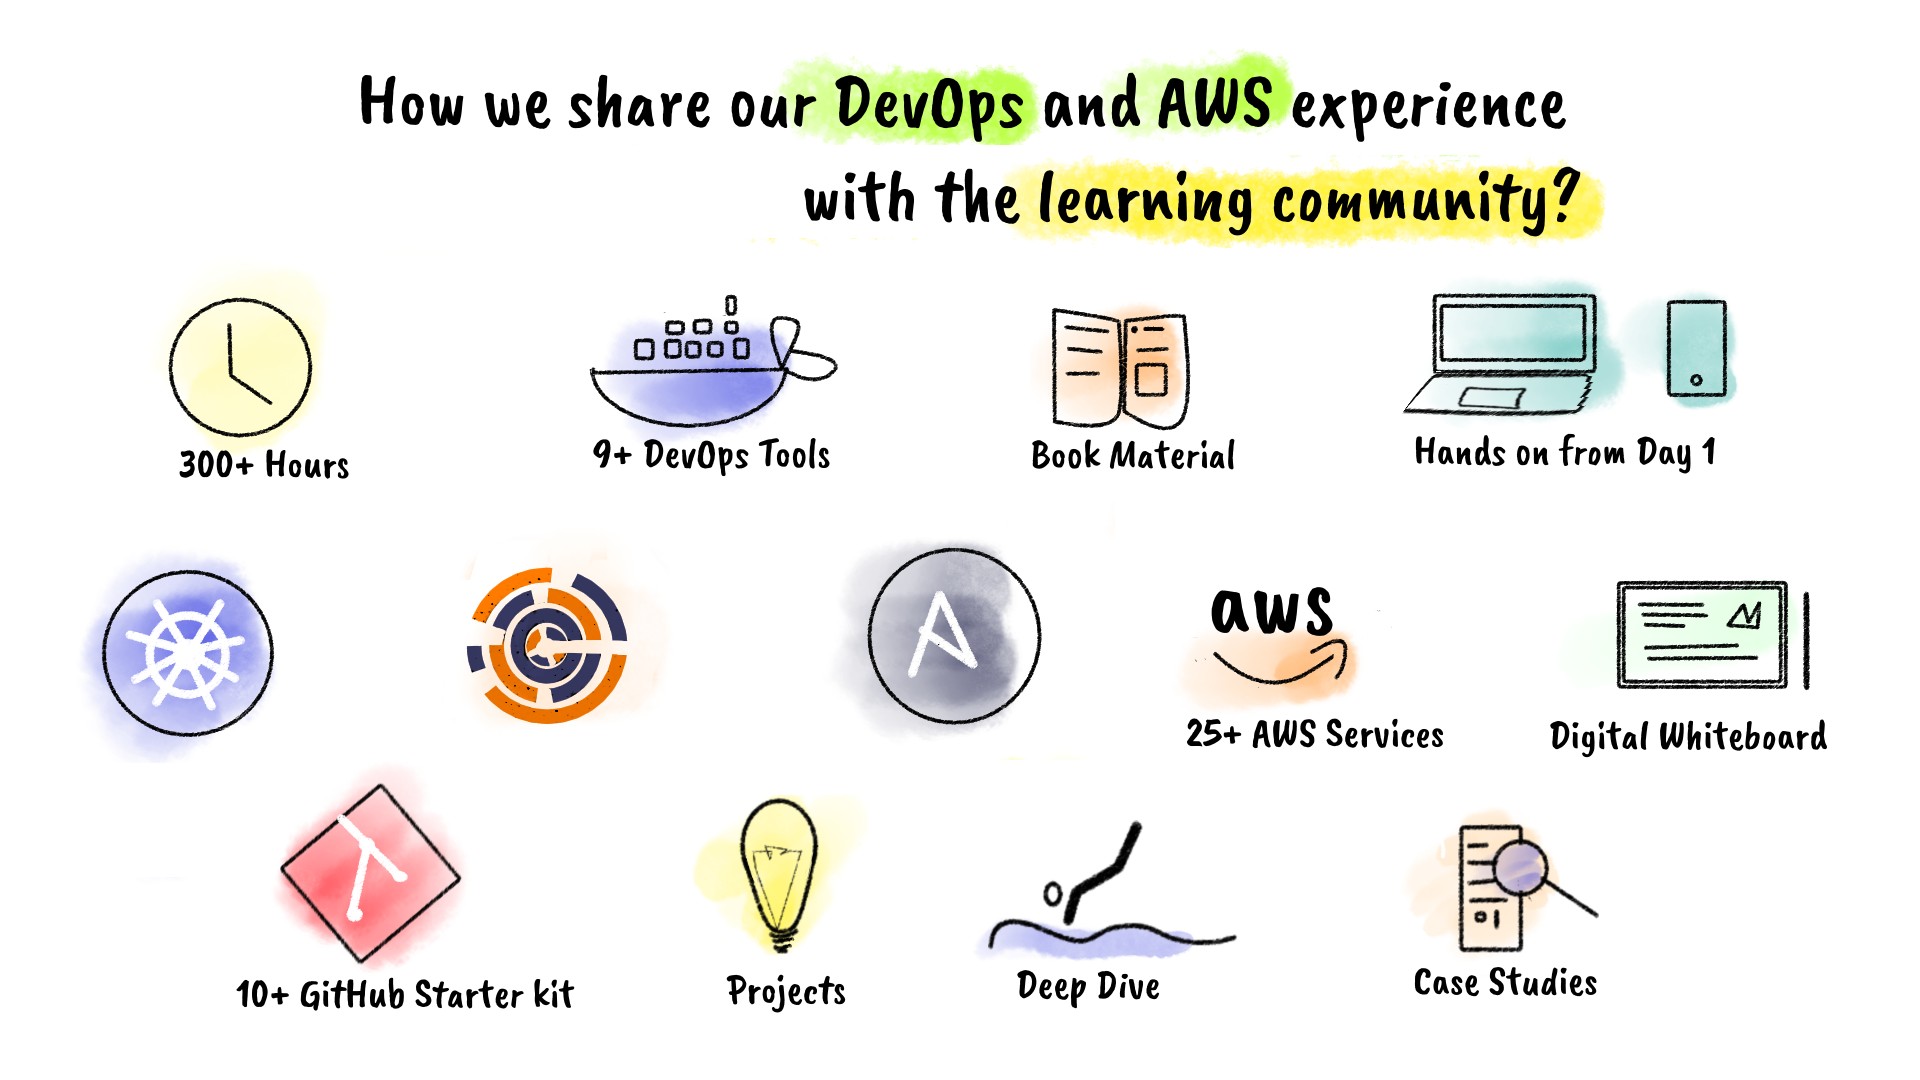 An illustration features the DevOps tools: Docker, Kubernetes, Ansible, Chef etc., and AWS and various conceptual imagery.